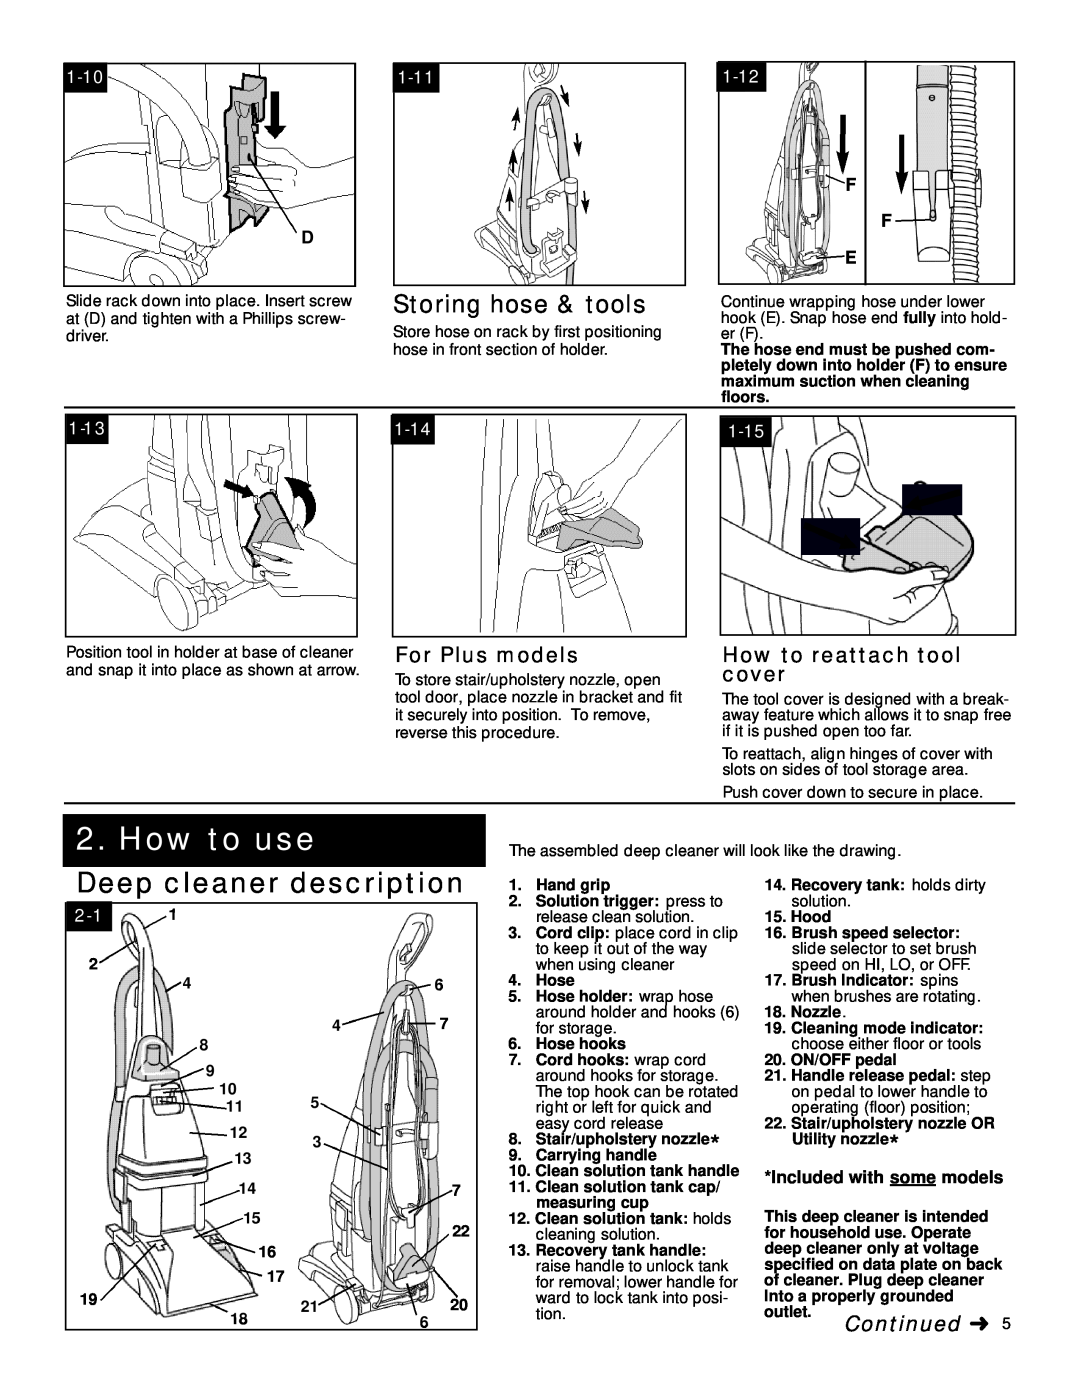 Hoover How to use, Storing hose & tools, For Plus models, How to reattach tool cover, Continued, F F E, 1-13 